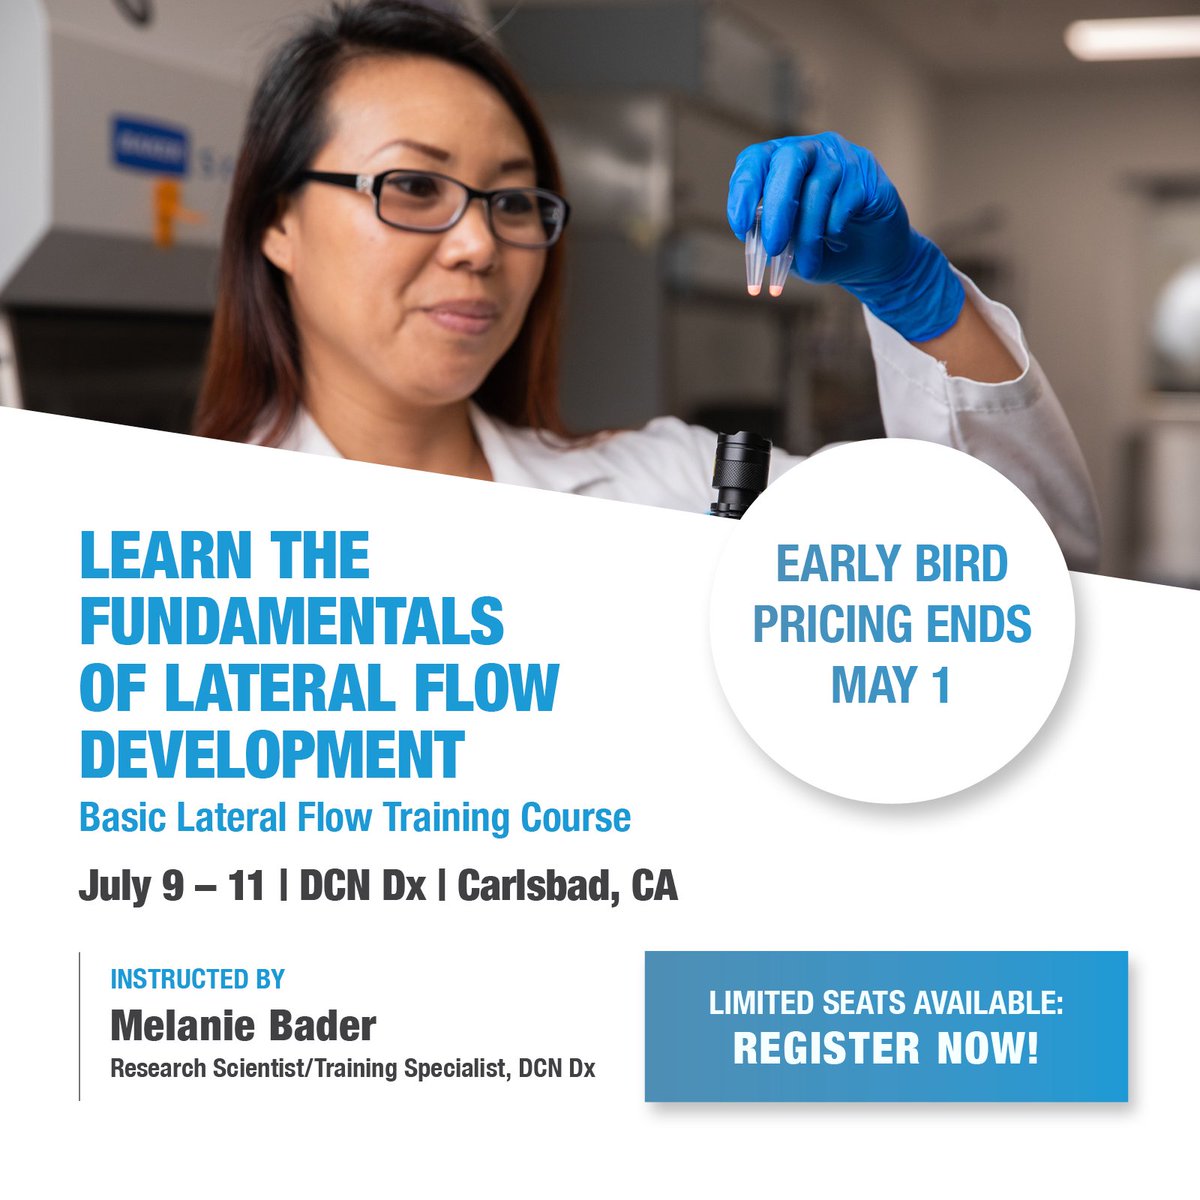 🔥 Early bird registration for our Basic #LateralFlow Training Course ends TODAY May 1! Save $1,000 on this hands-on course covering the fundamentals of successful #LFA development. Limited spots available. Register: hubs.ly/Q02v8CC60 #IVD #Biopharma #MedTech #LifeScience